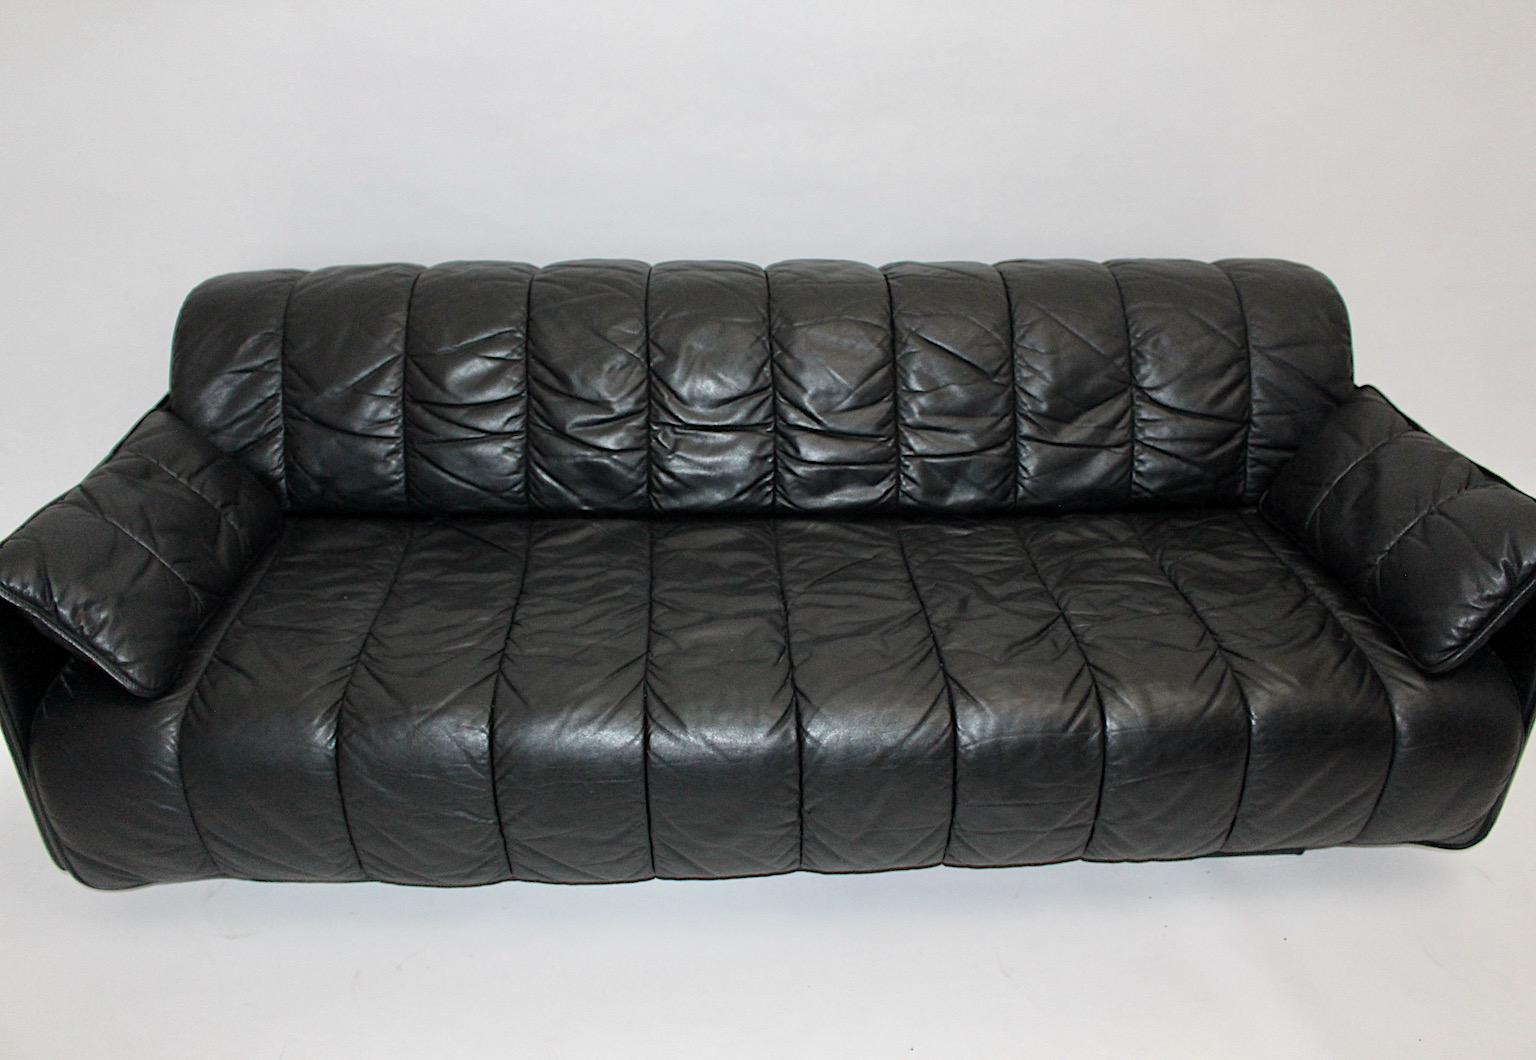 DeSede vintage sofa or daybed DS 69 from high quality black stitched leather 1970s Switzerland.
While the wonderful and comfortable sofa could also used as freestanding seating, the extendable feature allows to customize every aspect of living and